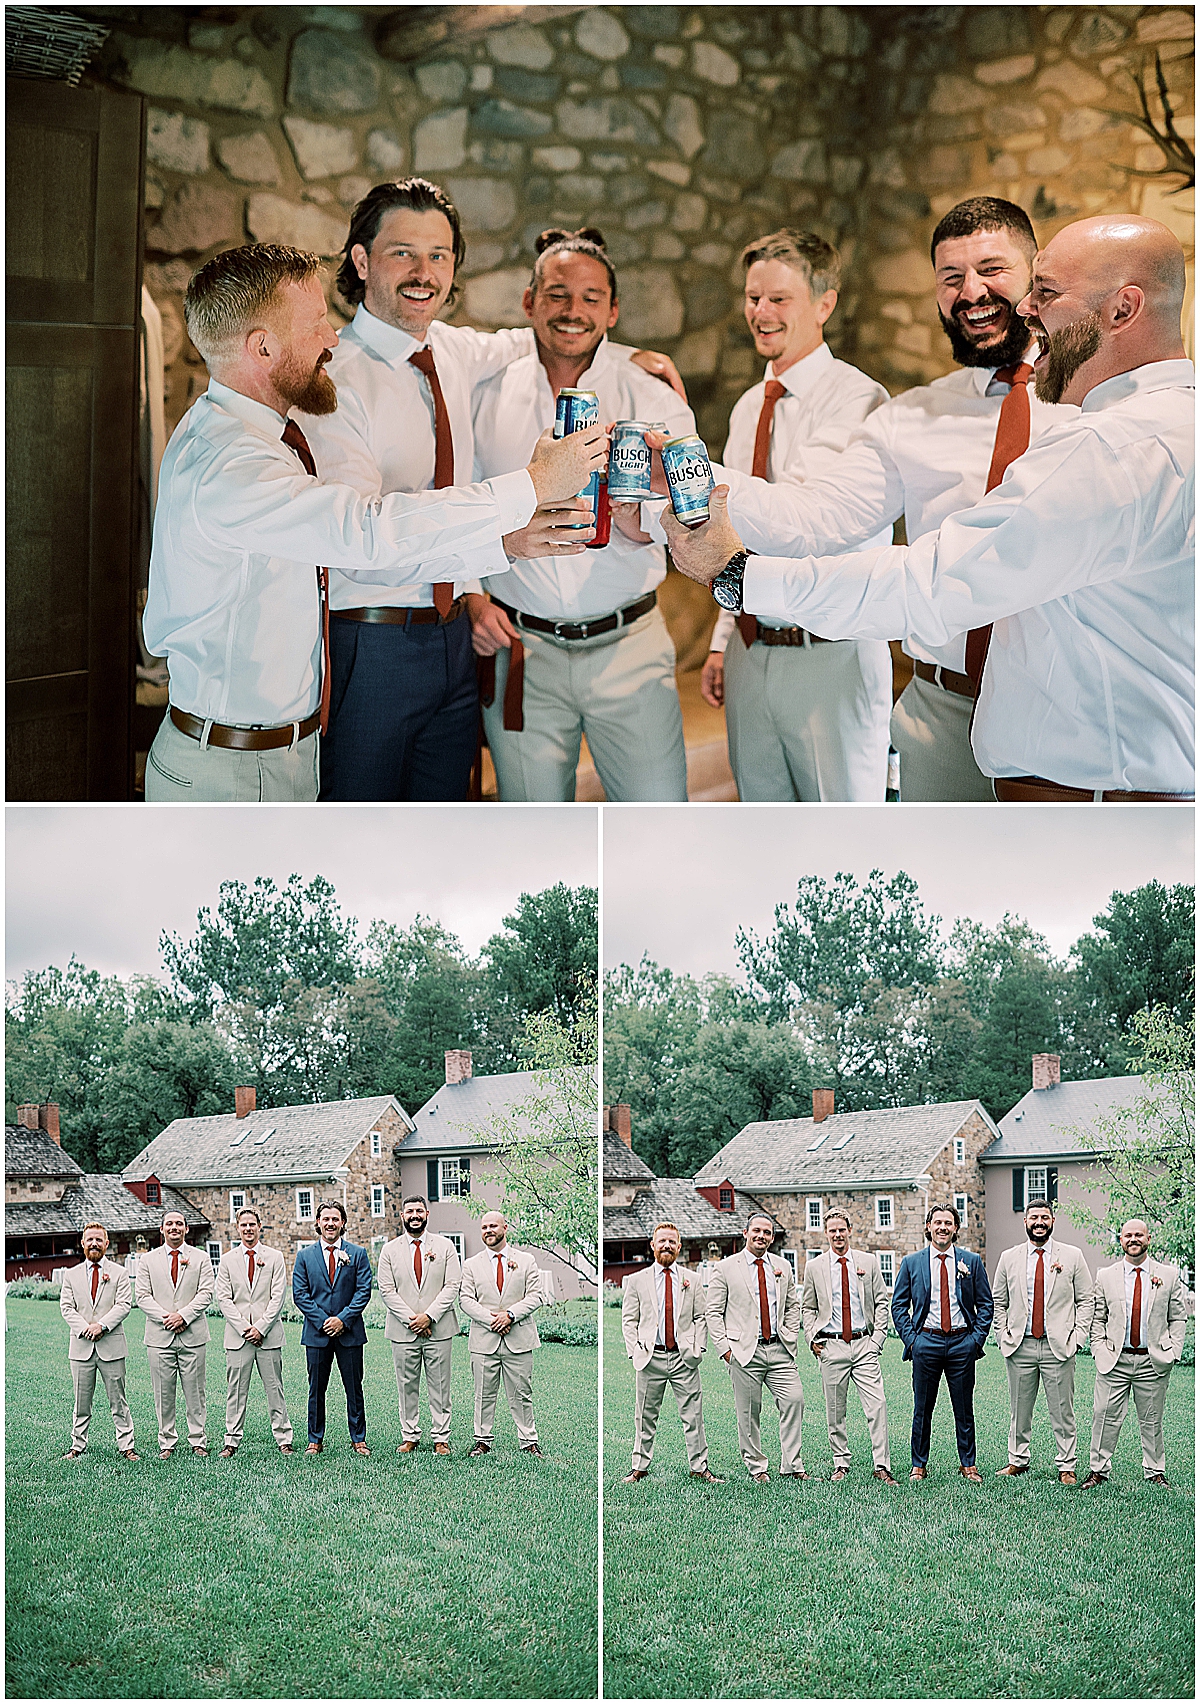 groom and groomsmen cheers beers while getting ready for wedding cermony